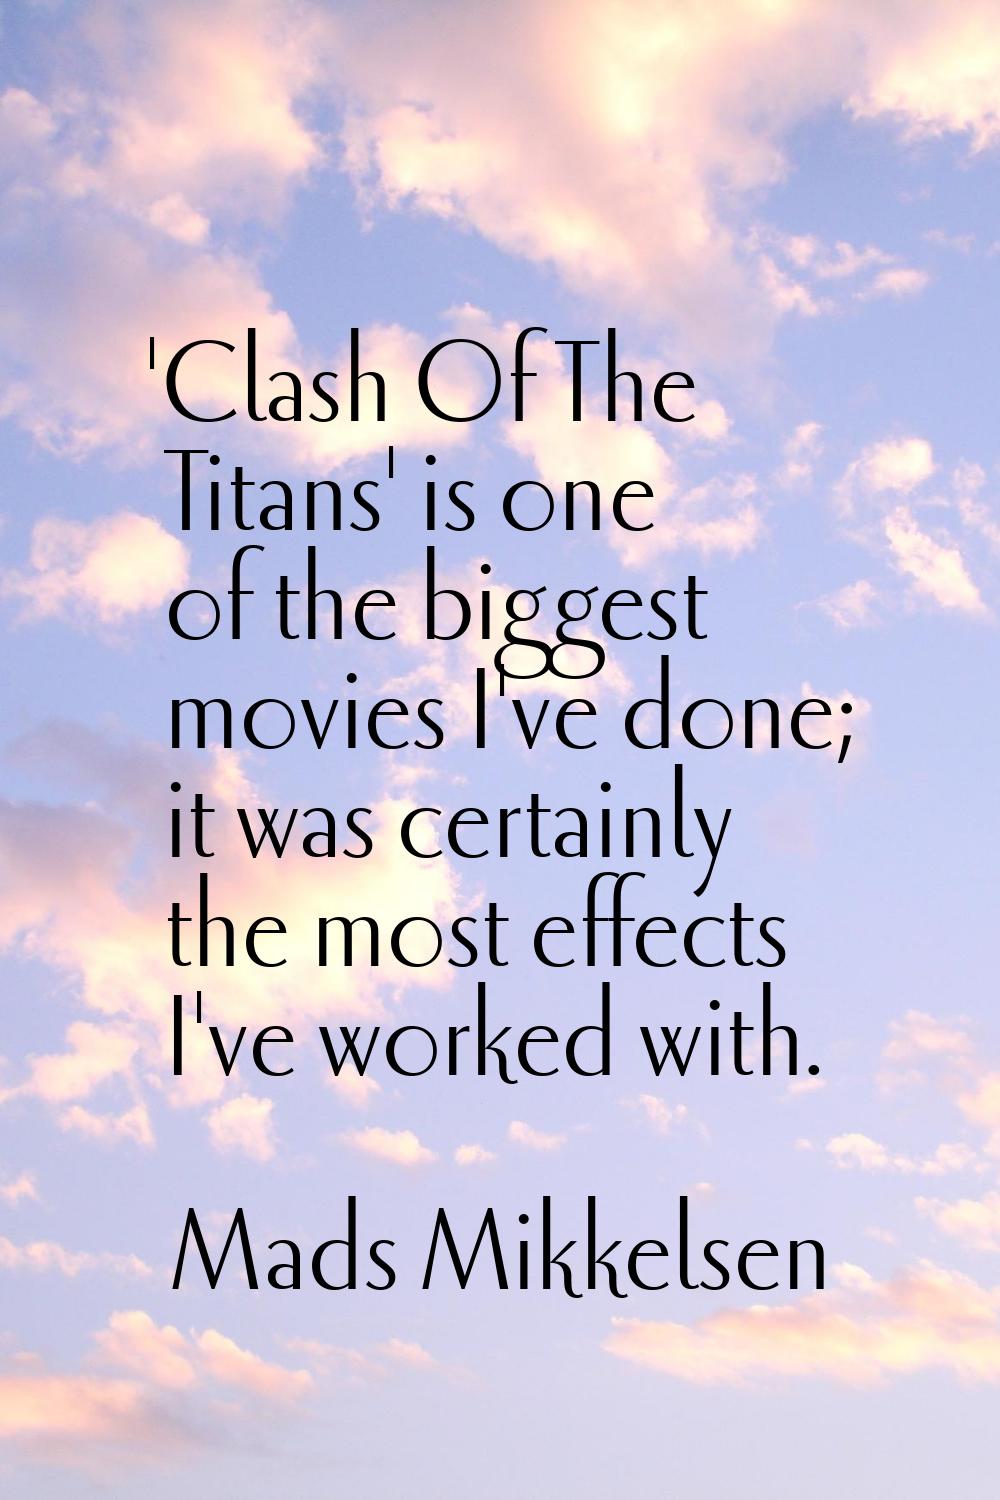 'Clash Of The Titans' is one of the biggest movies I've done; it was certainly the most effects I'v